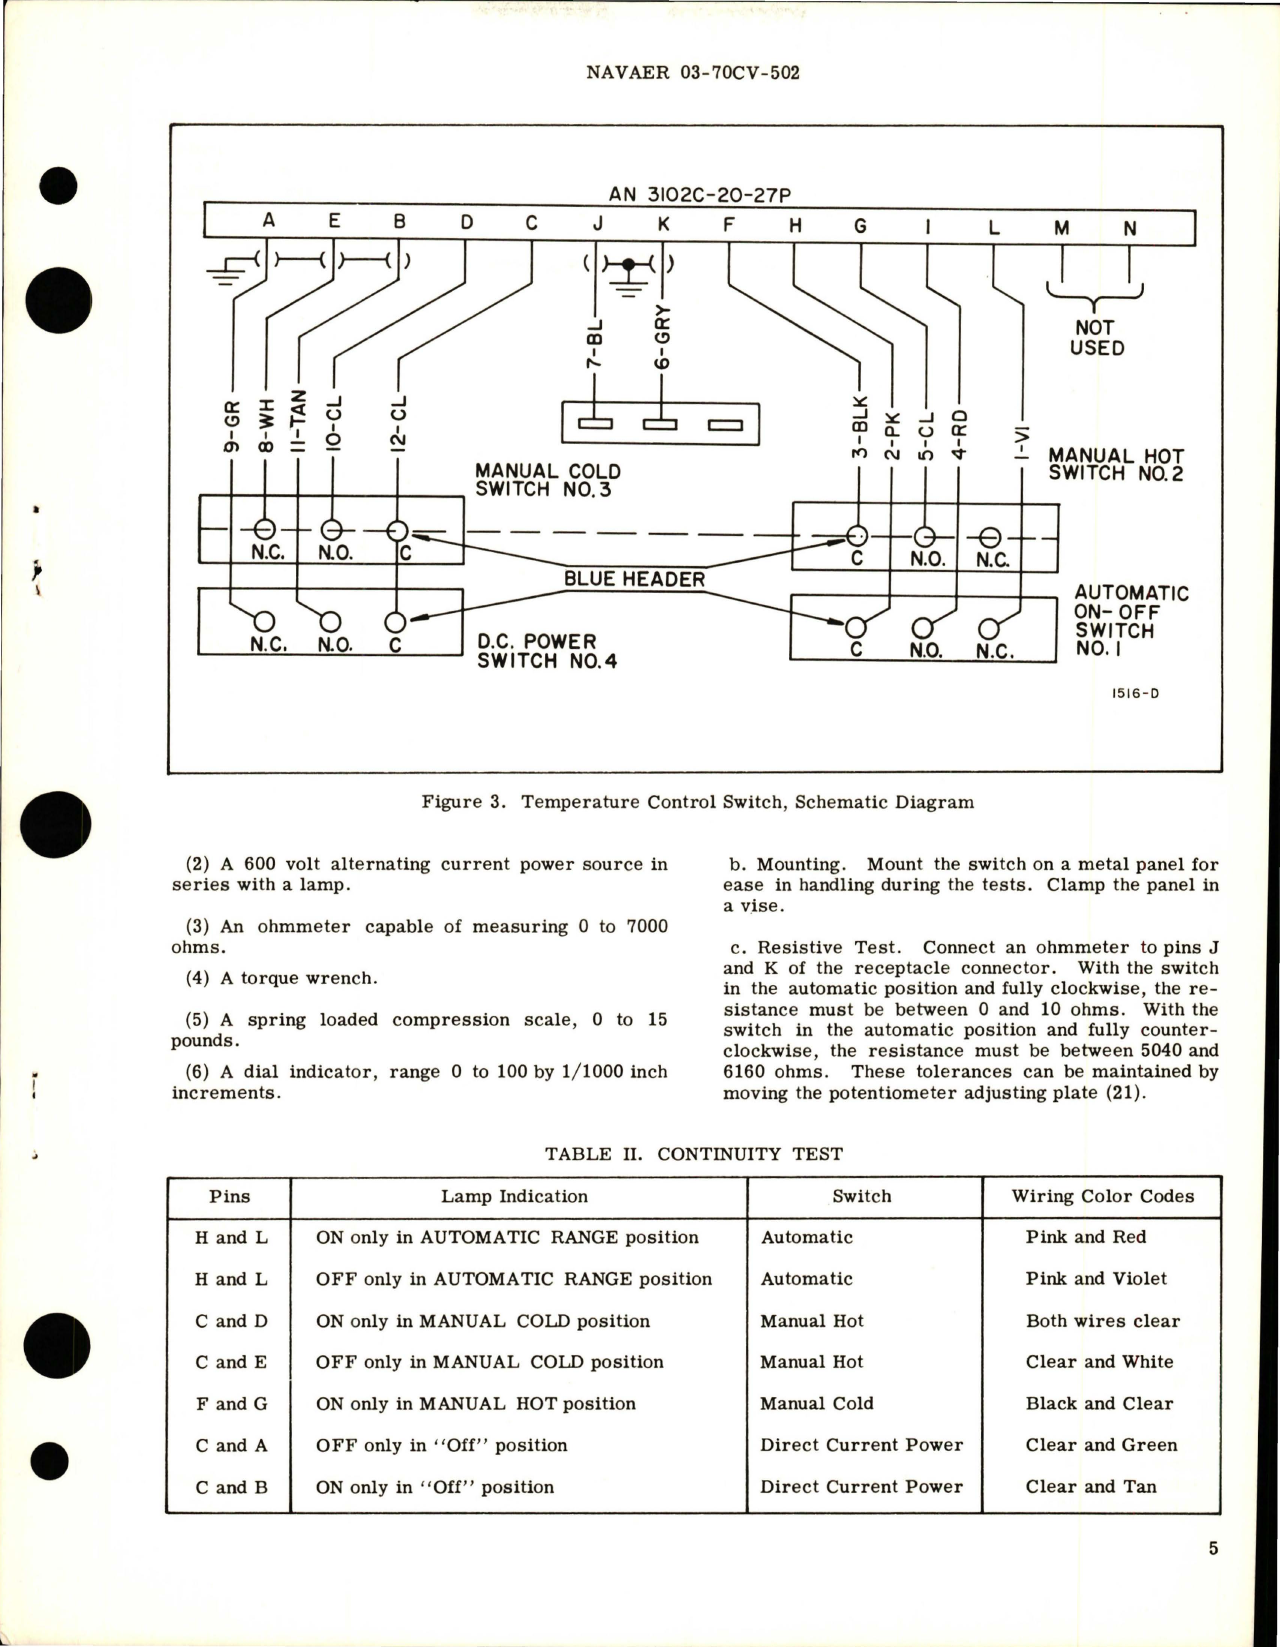 Sample page 5 from AirCorps Library document: Overhaul Instructions with Parts Breakdown for Temperature Control Switch - Parts 25632905, 25632905-01, and 25632905-02